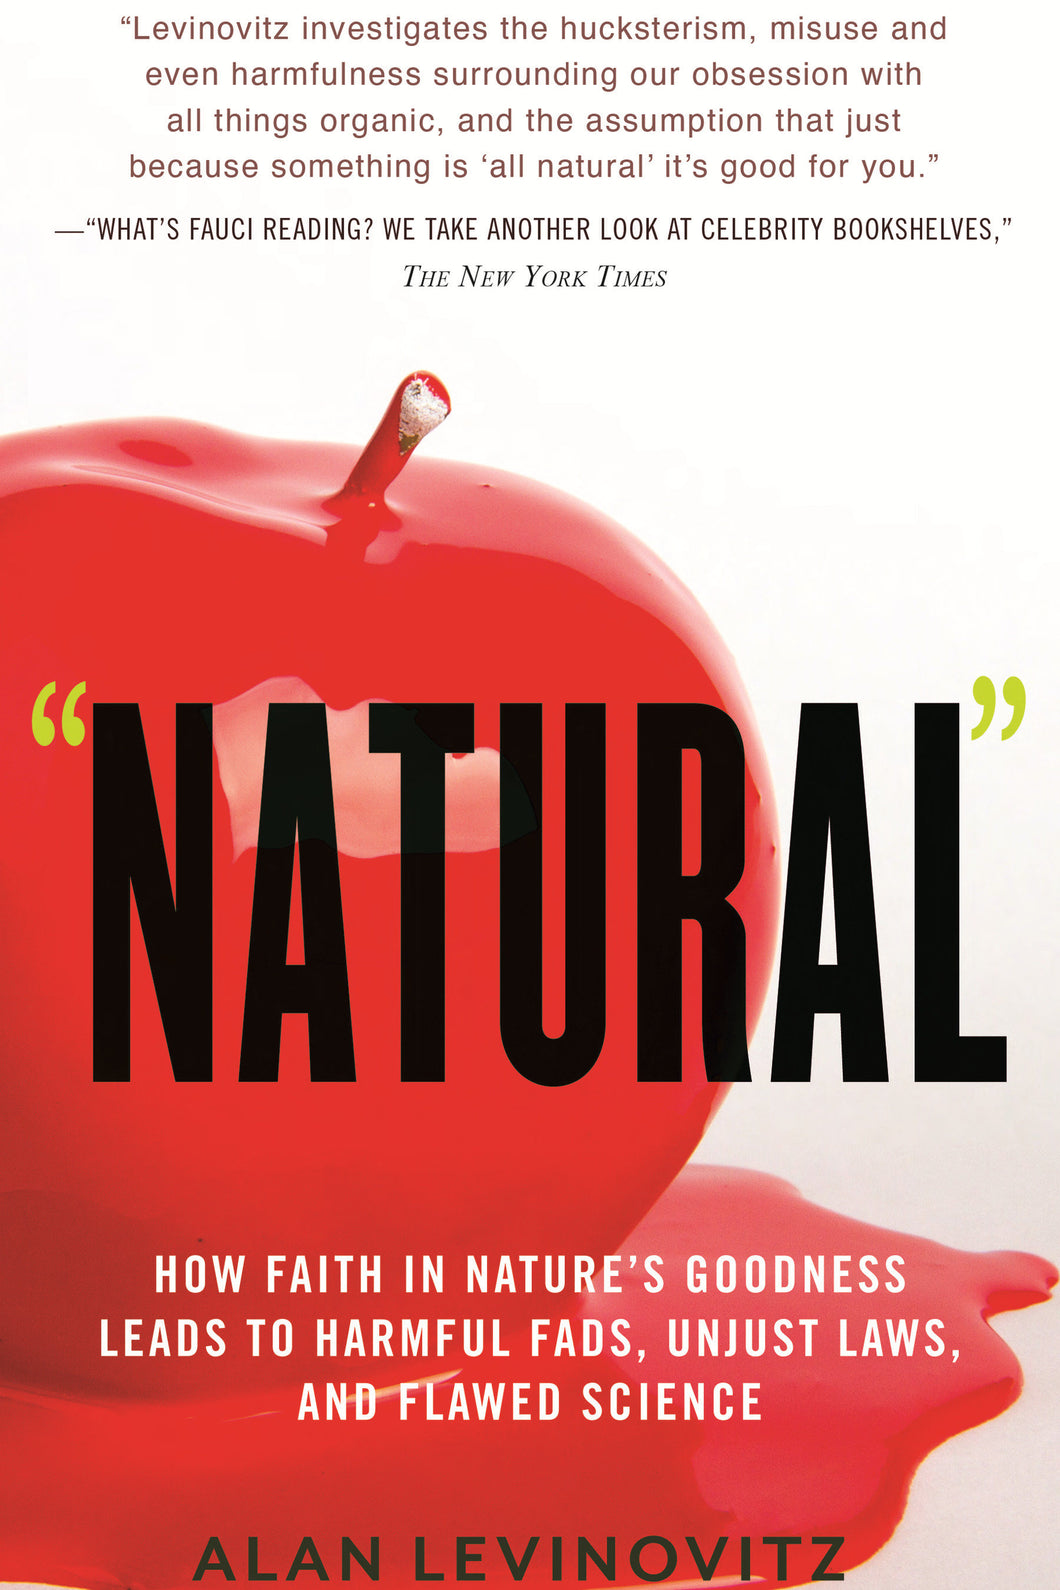 Natural: How Faith in Nature's Goodness Leads to Harmful Fads, Unjust Laws, and Flawed Sc ience